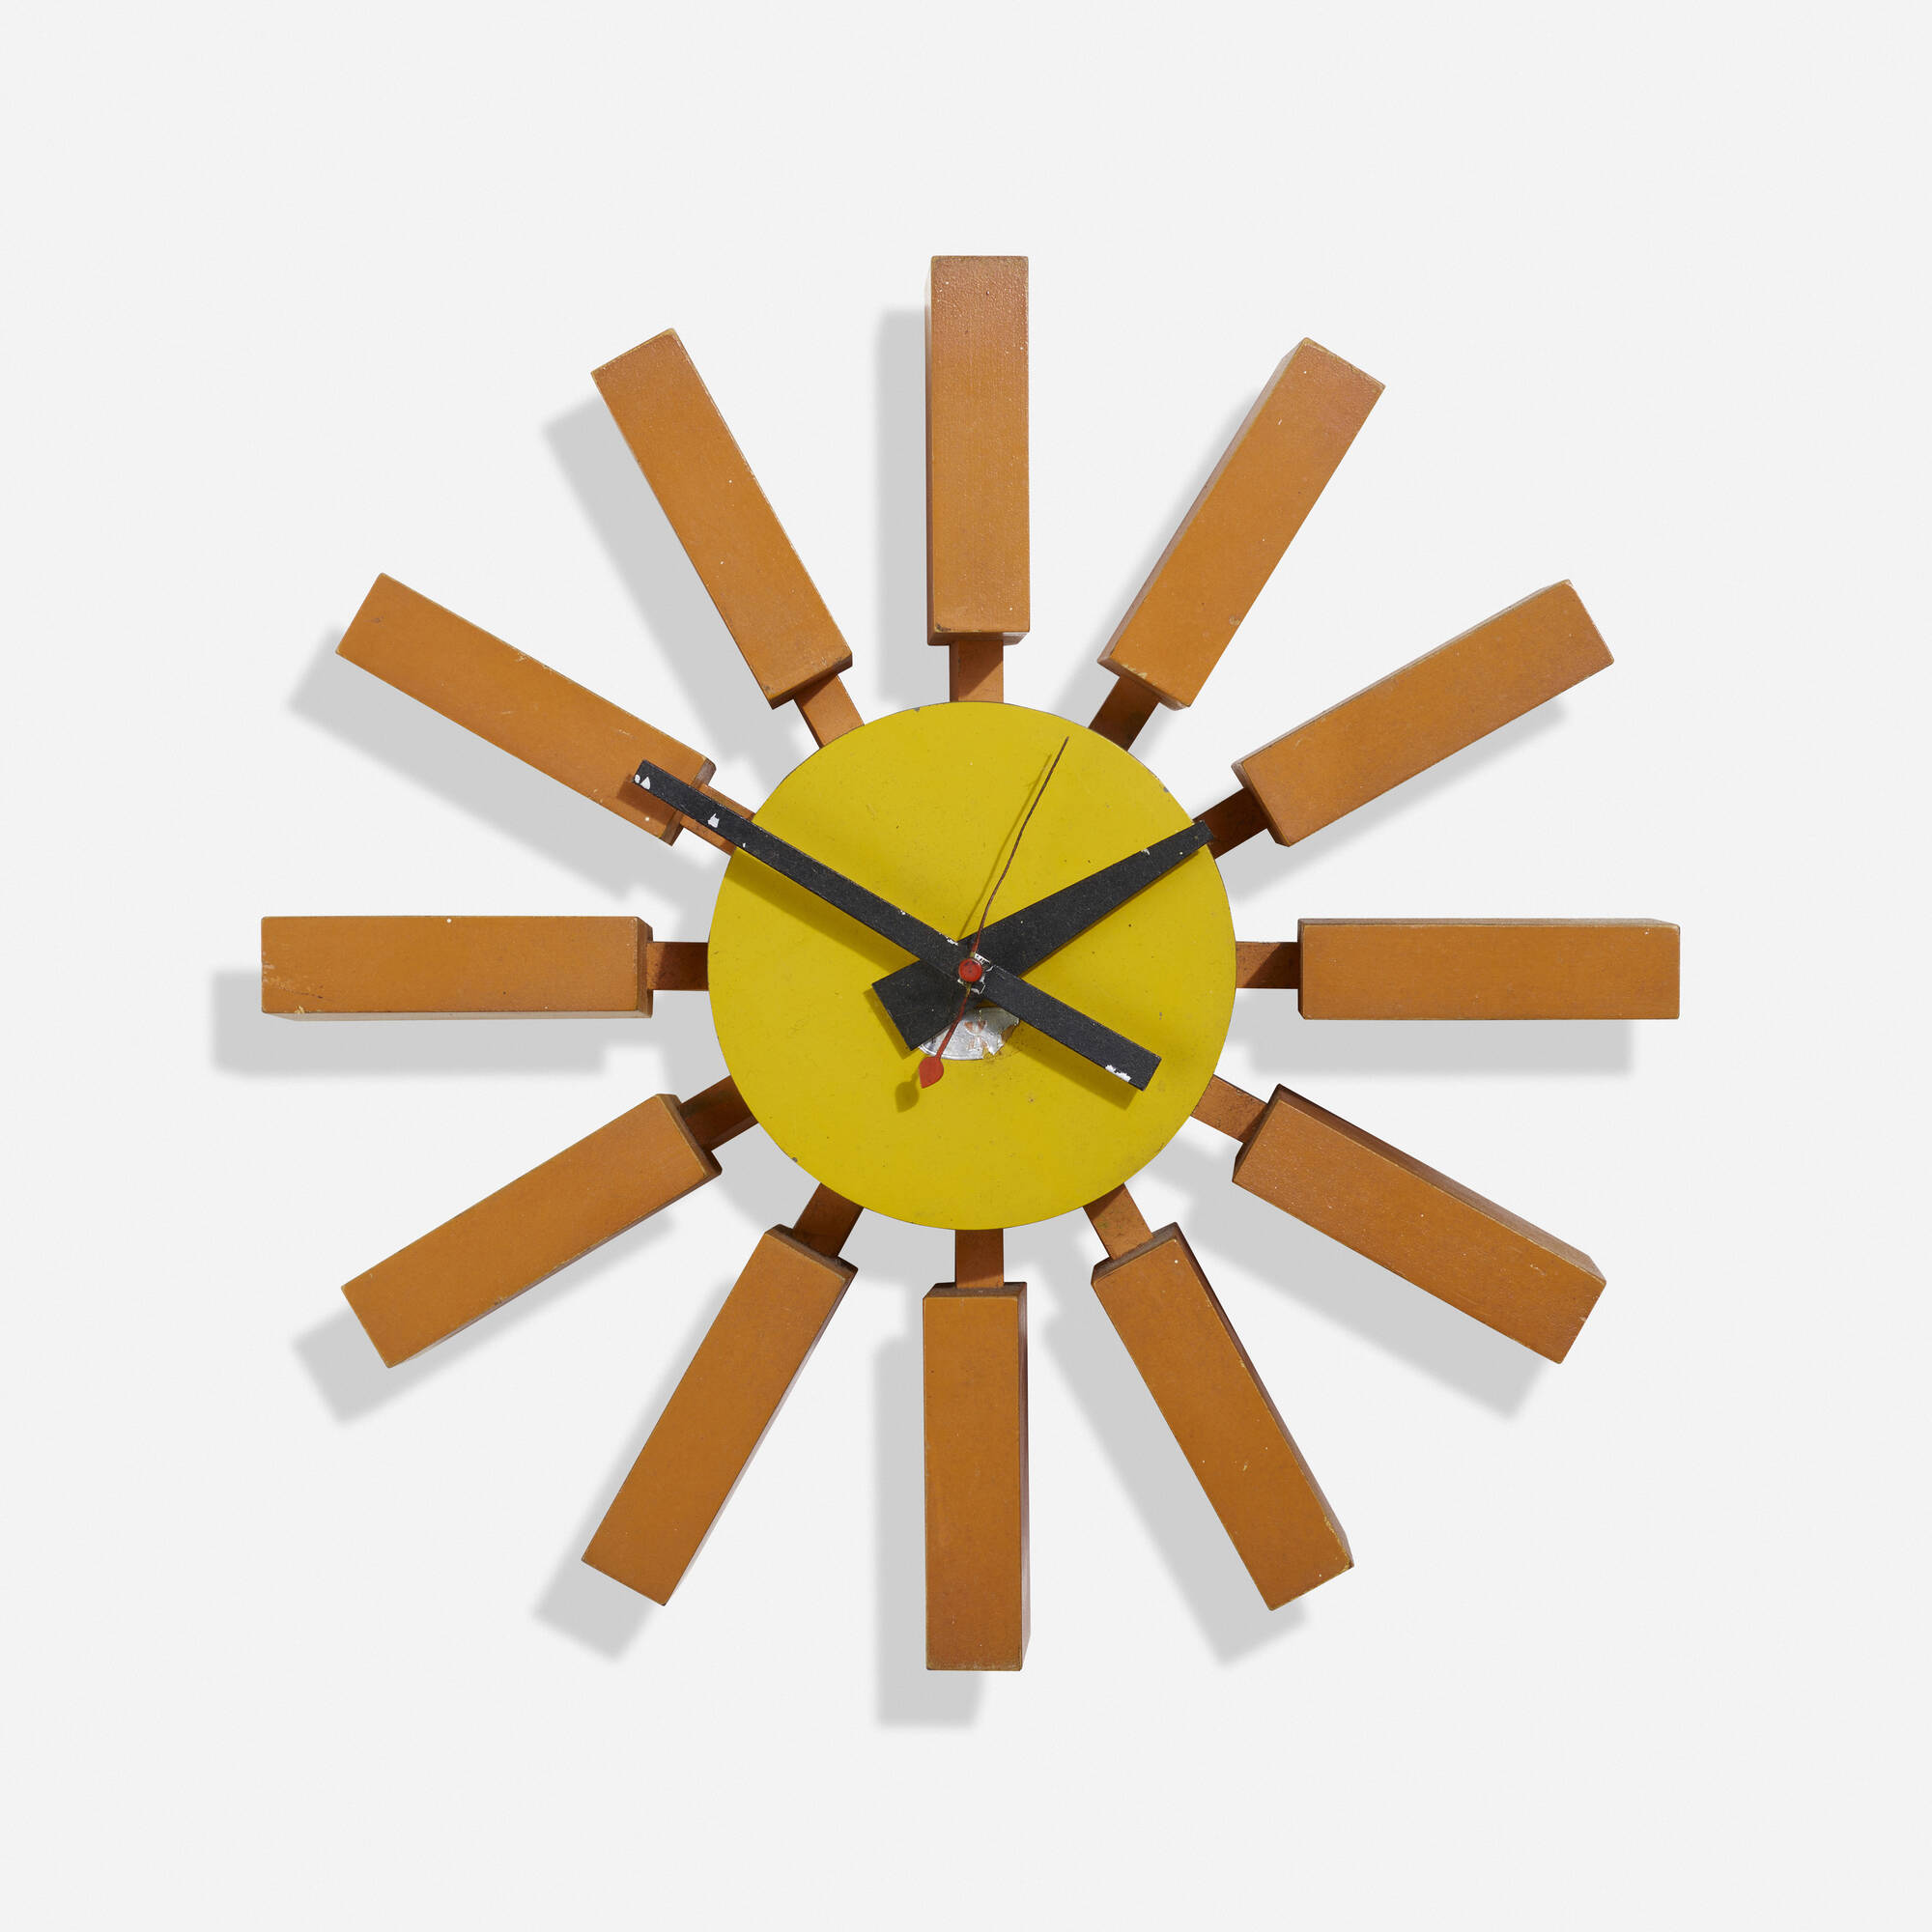 202 1 Herman Miller Vintage December 2023 George Nelson Associates Block Wall Clock Model 2285a From The Clocks Ahead Of Time Series  Herman Miller Auction ?t=1703282027